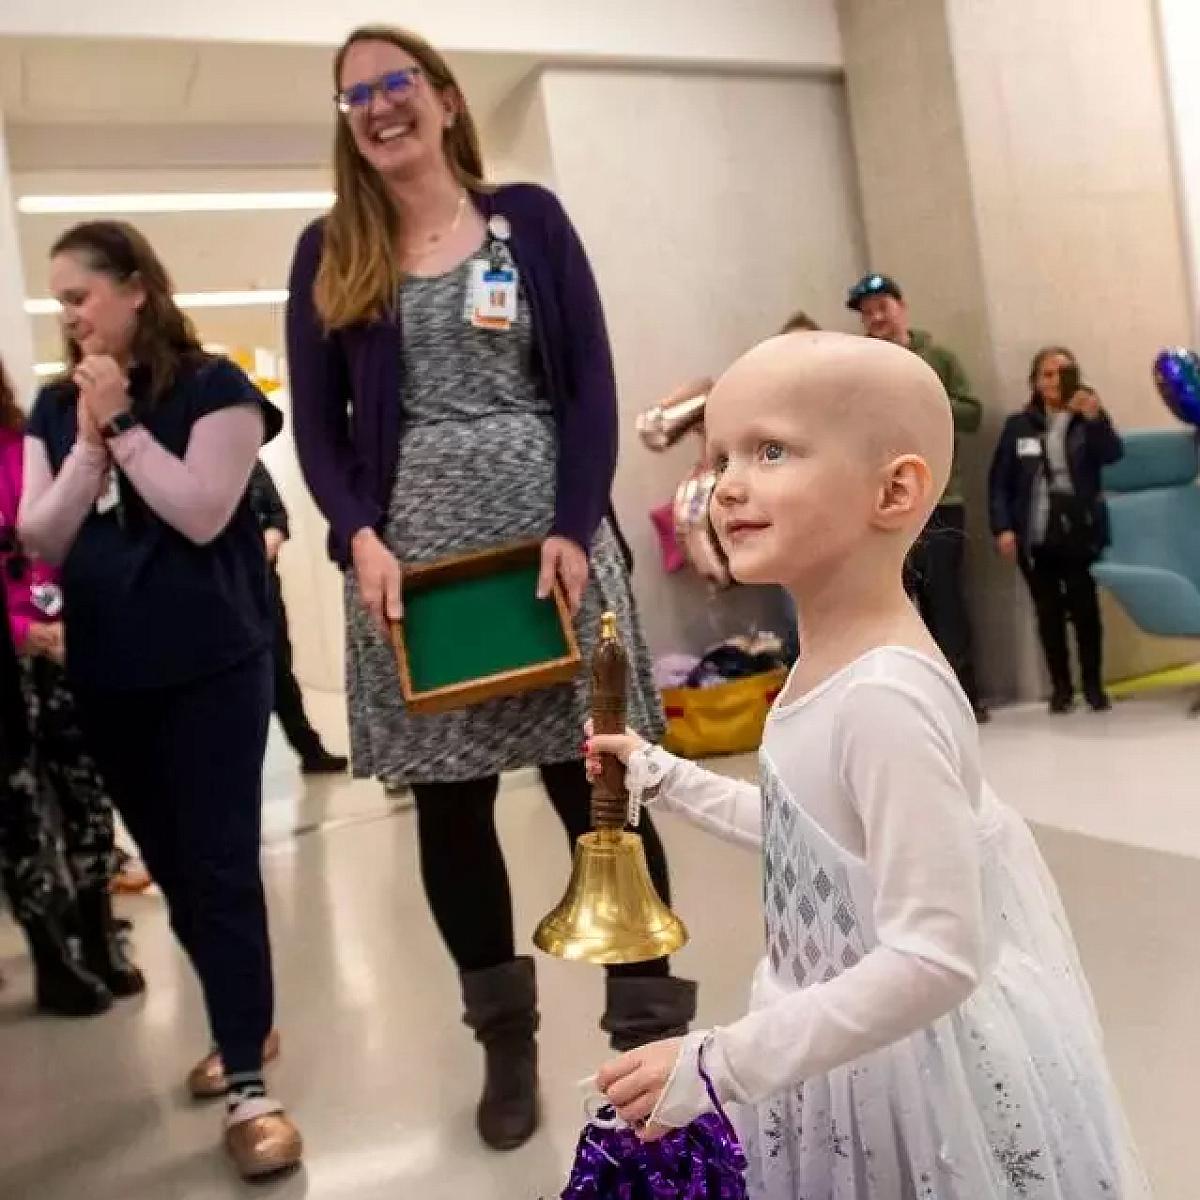 Parker holding a bell to celebrate completing her chemotherapy treatment